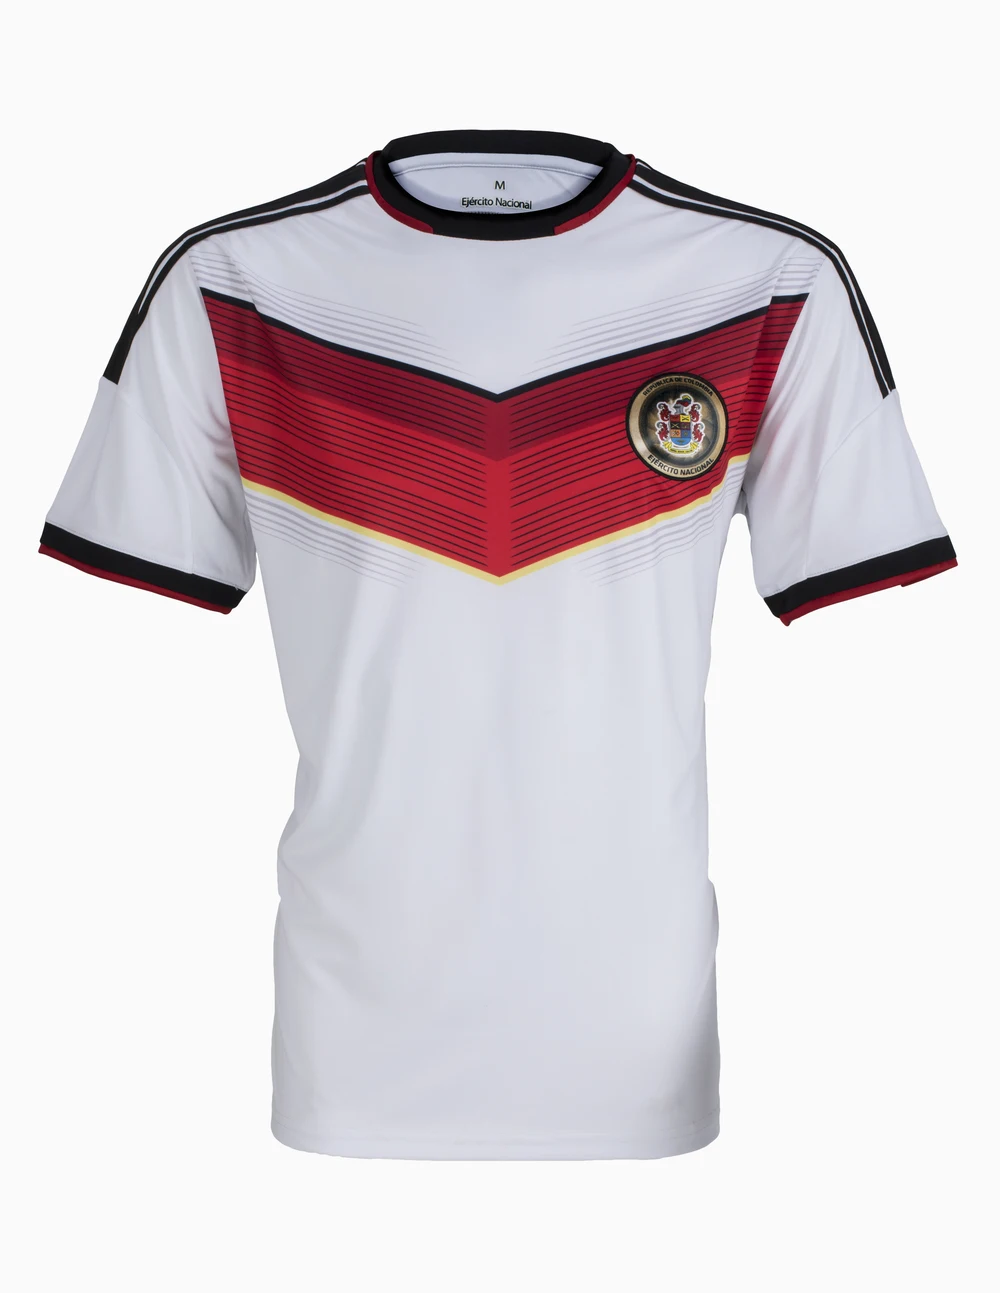 new colombia jersey